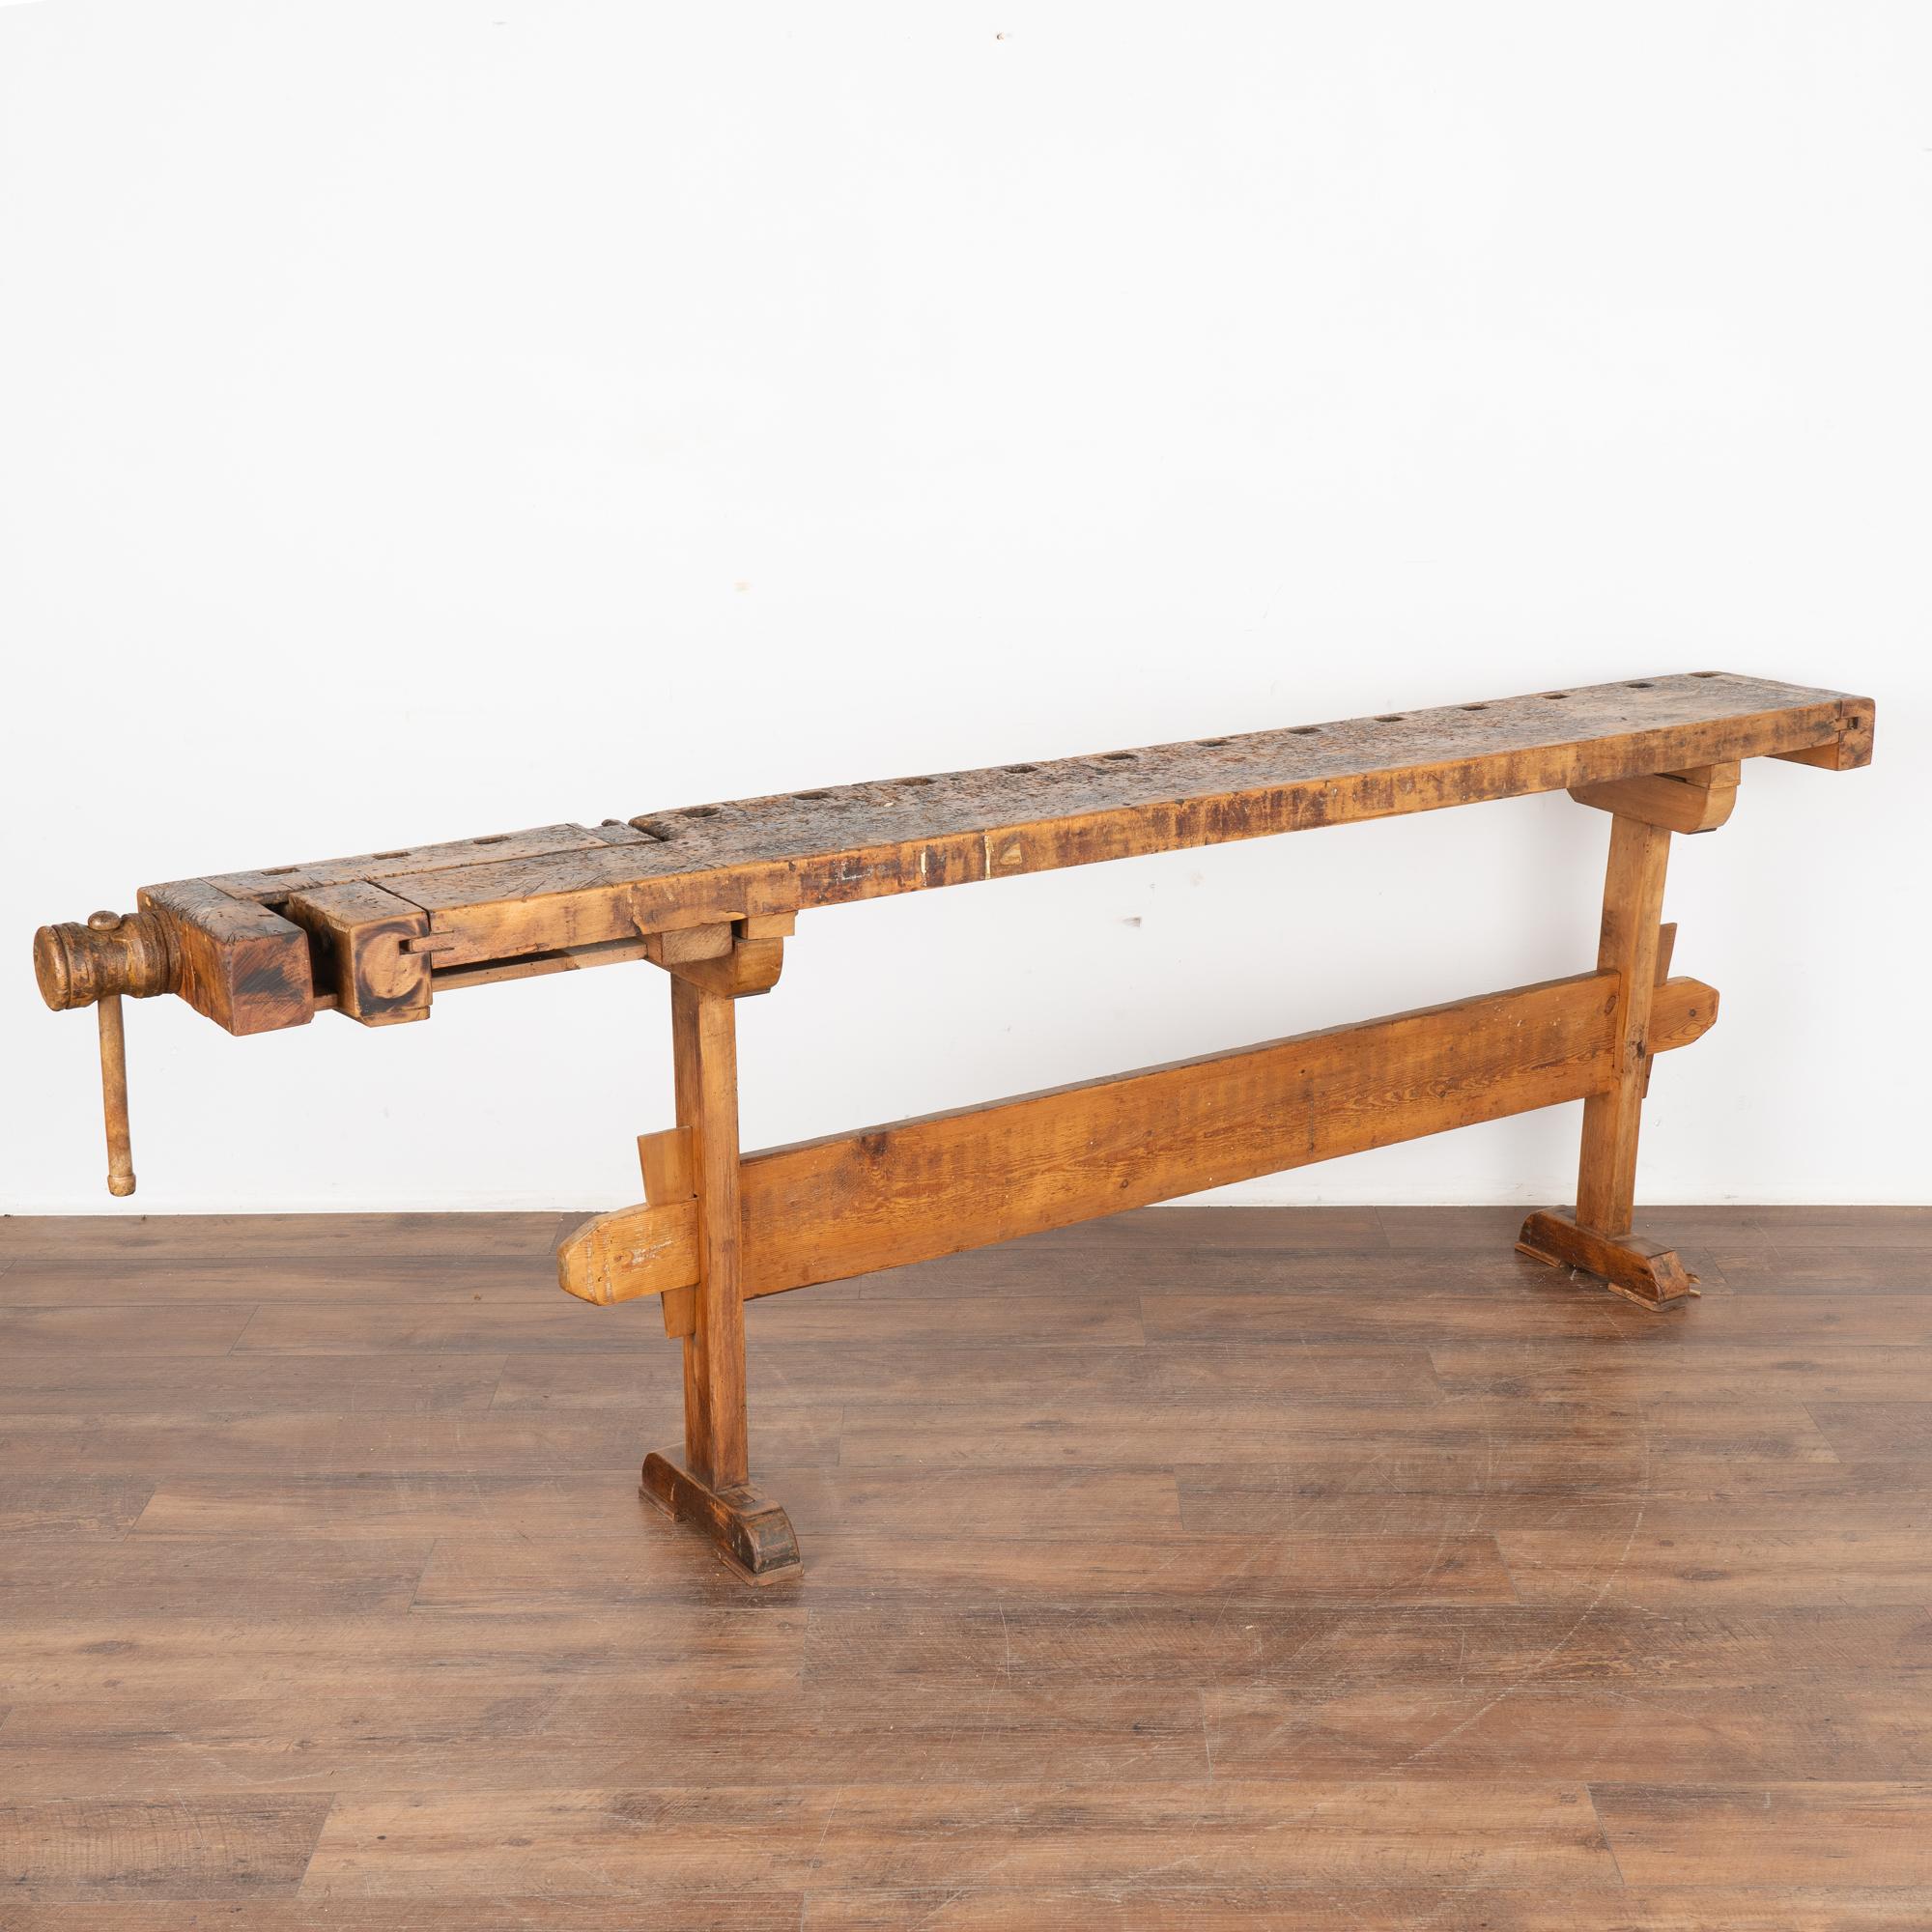 The worn patina of this old carpenter's workbench is a reflection of its age and years of use. Every ding, scratch, deep gouge and stain enrich its character and appeal.
This rustic work table is narrow, at only 11.5